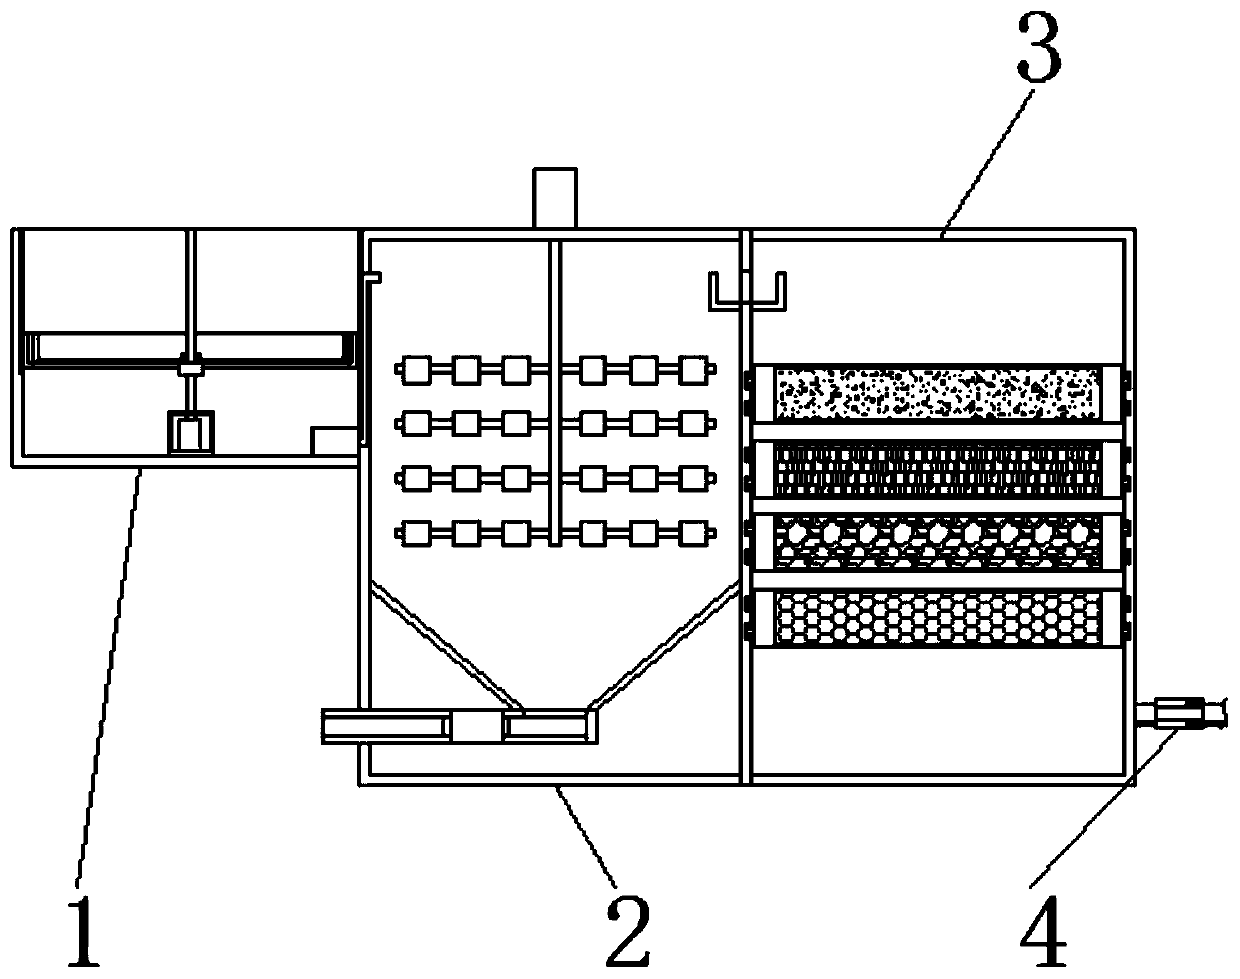 Wastewater treatment apparatus for textile processing